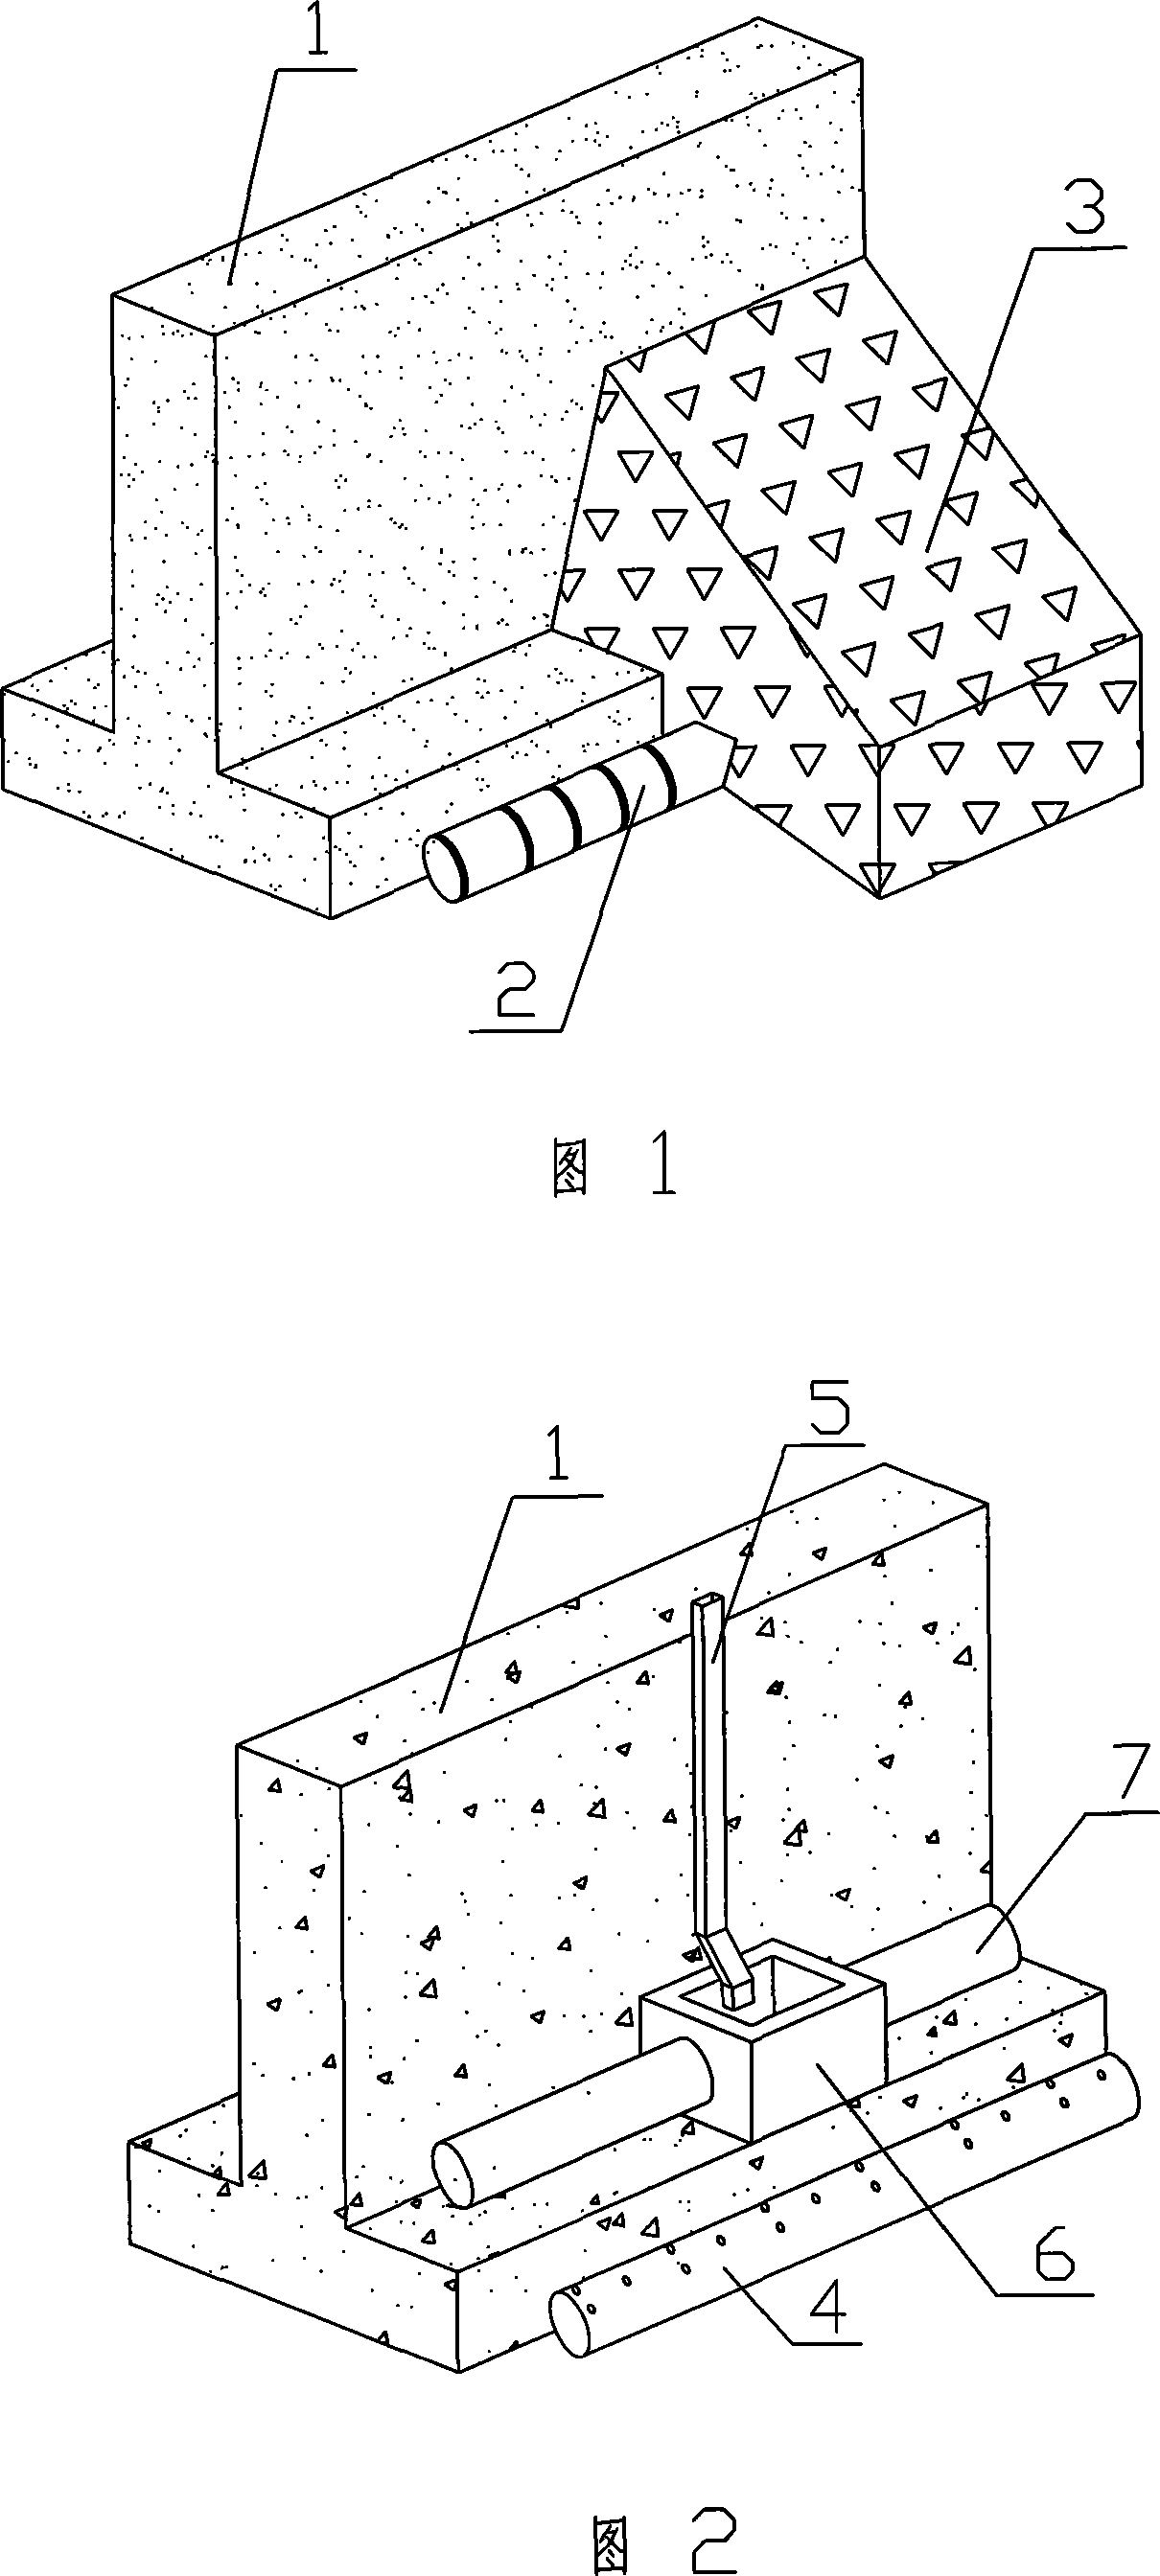 Foundation drainage system of wooden structure house